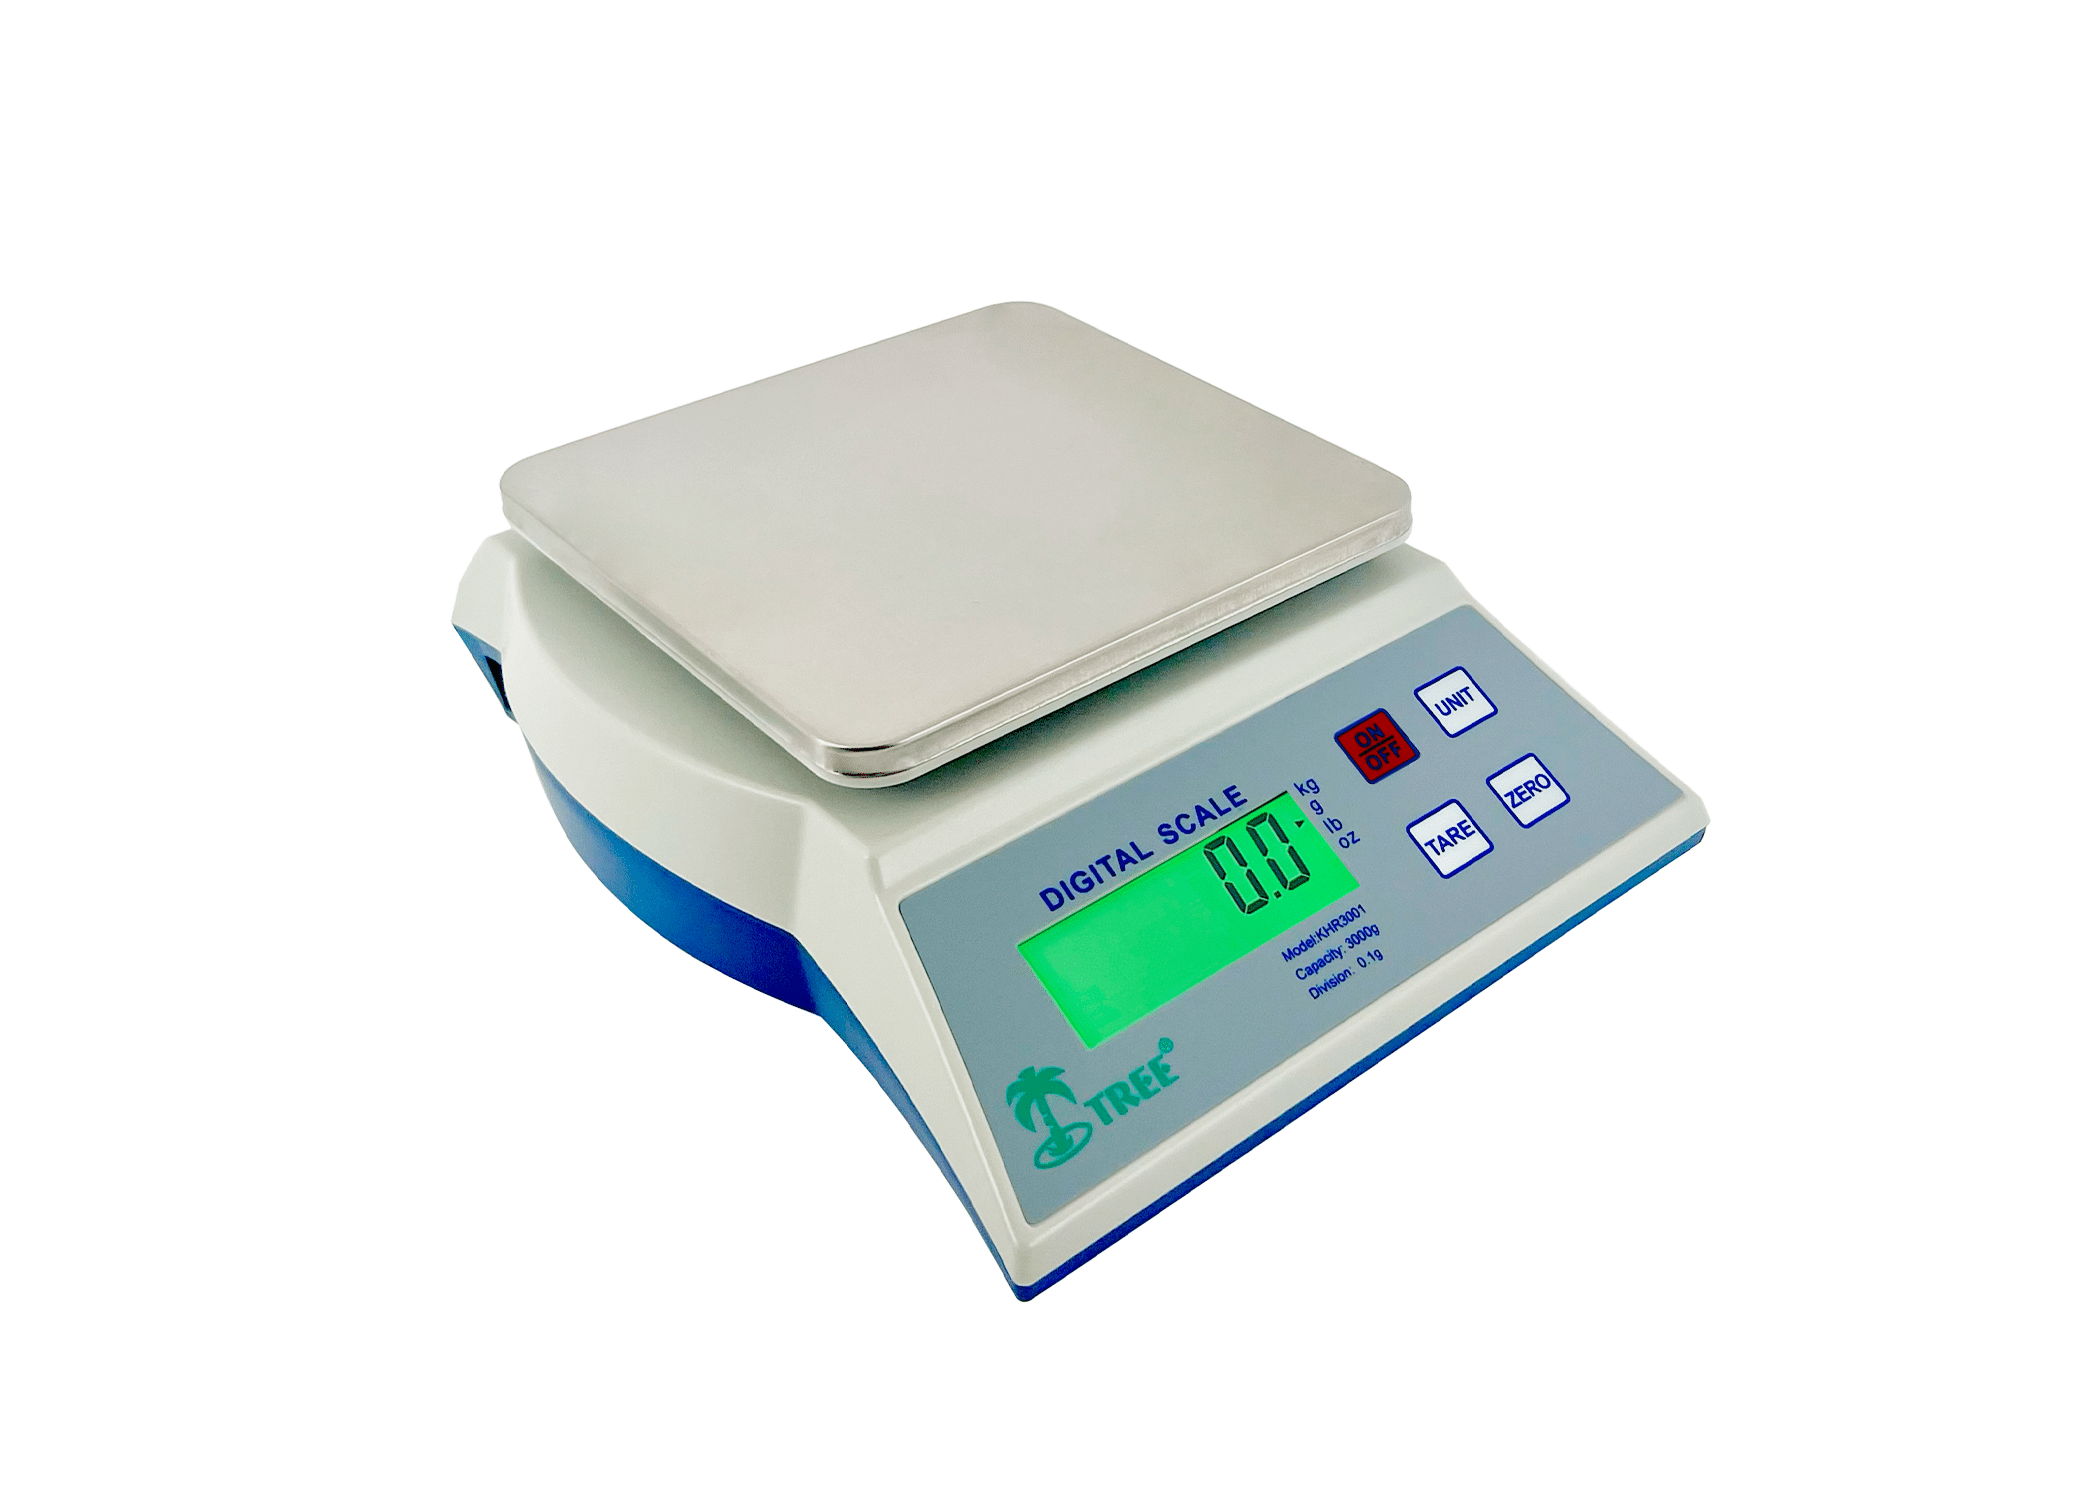 Digital Kitchen Food Scale Weight Balance in Pounds, Grams, Ounces